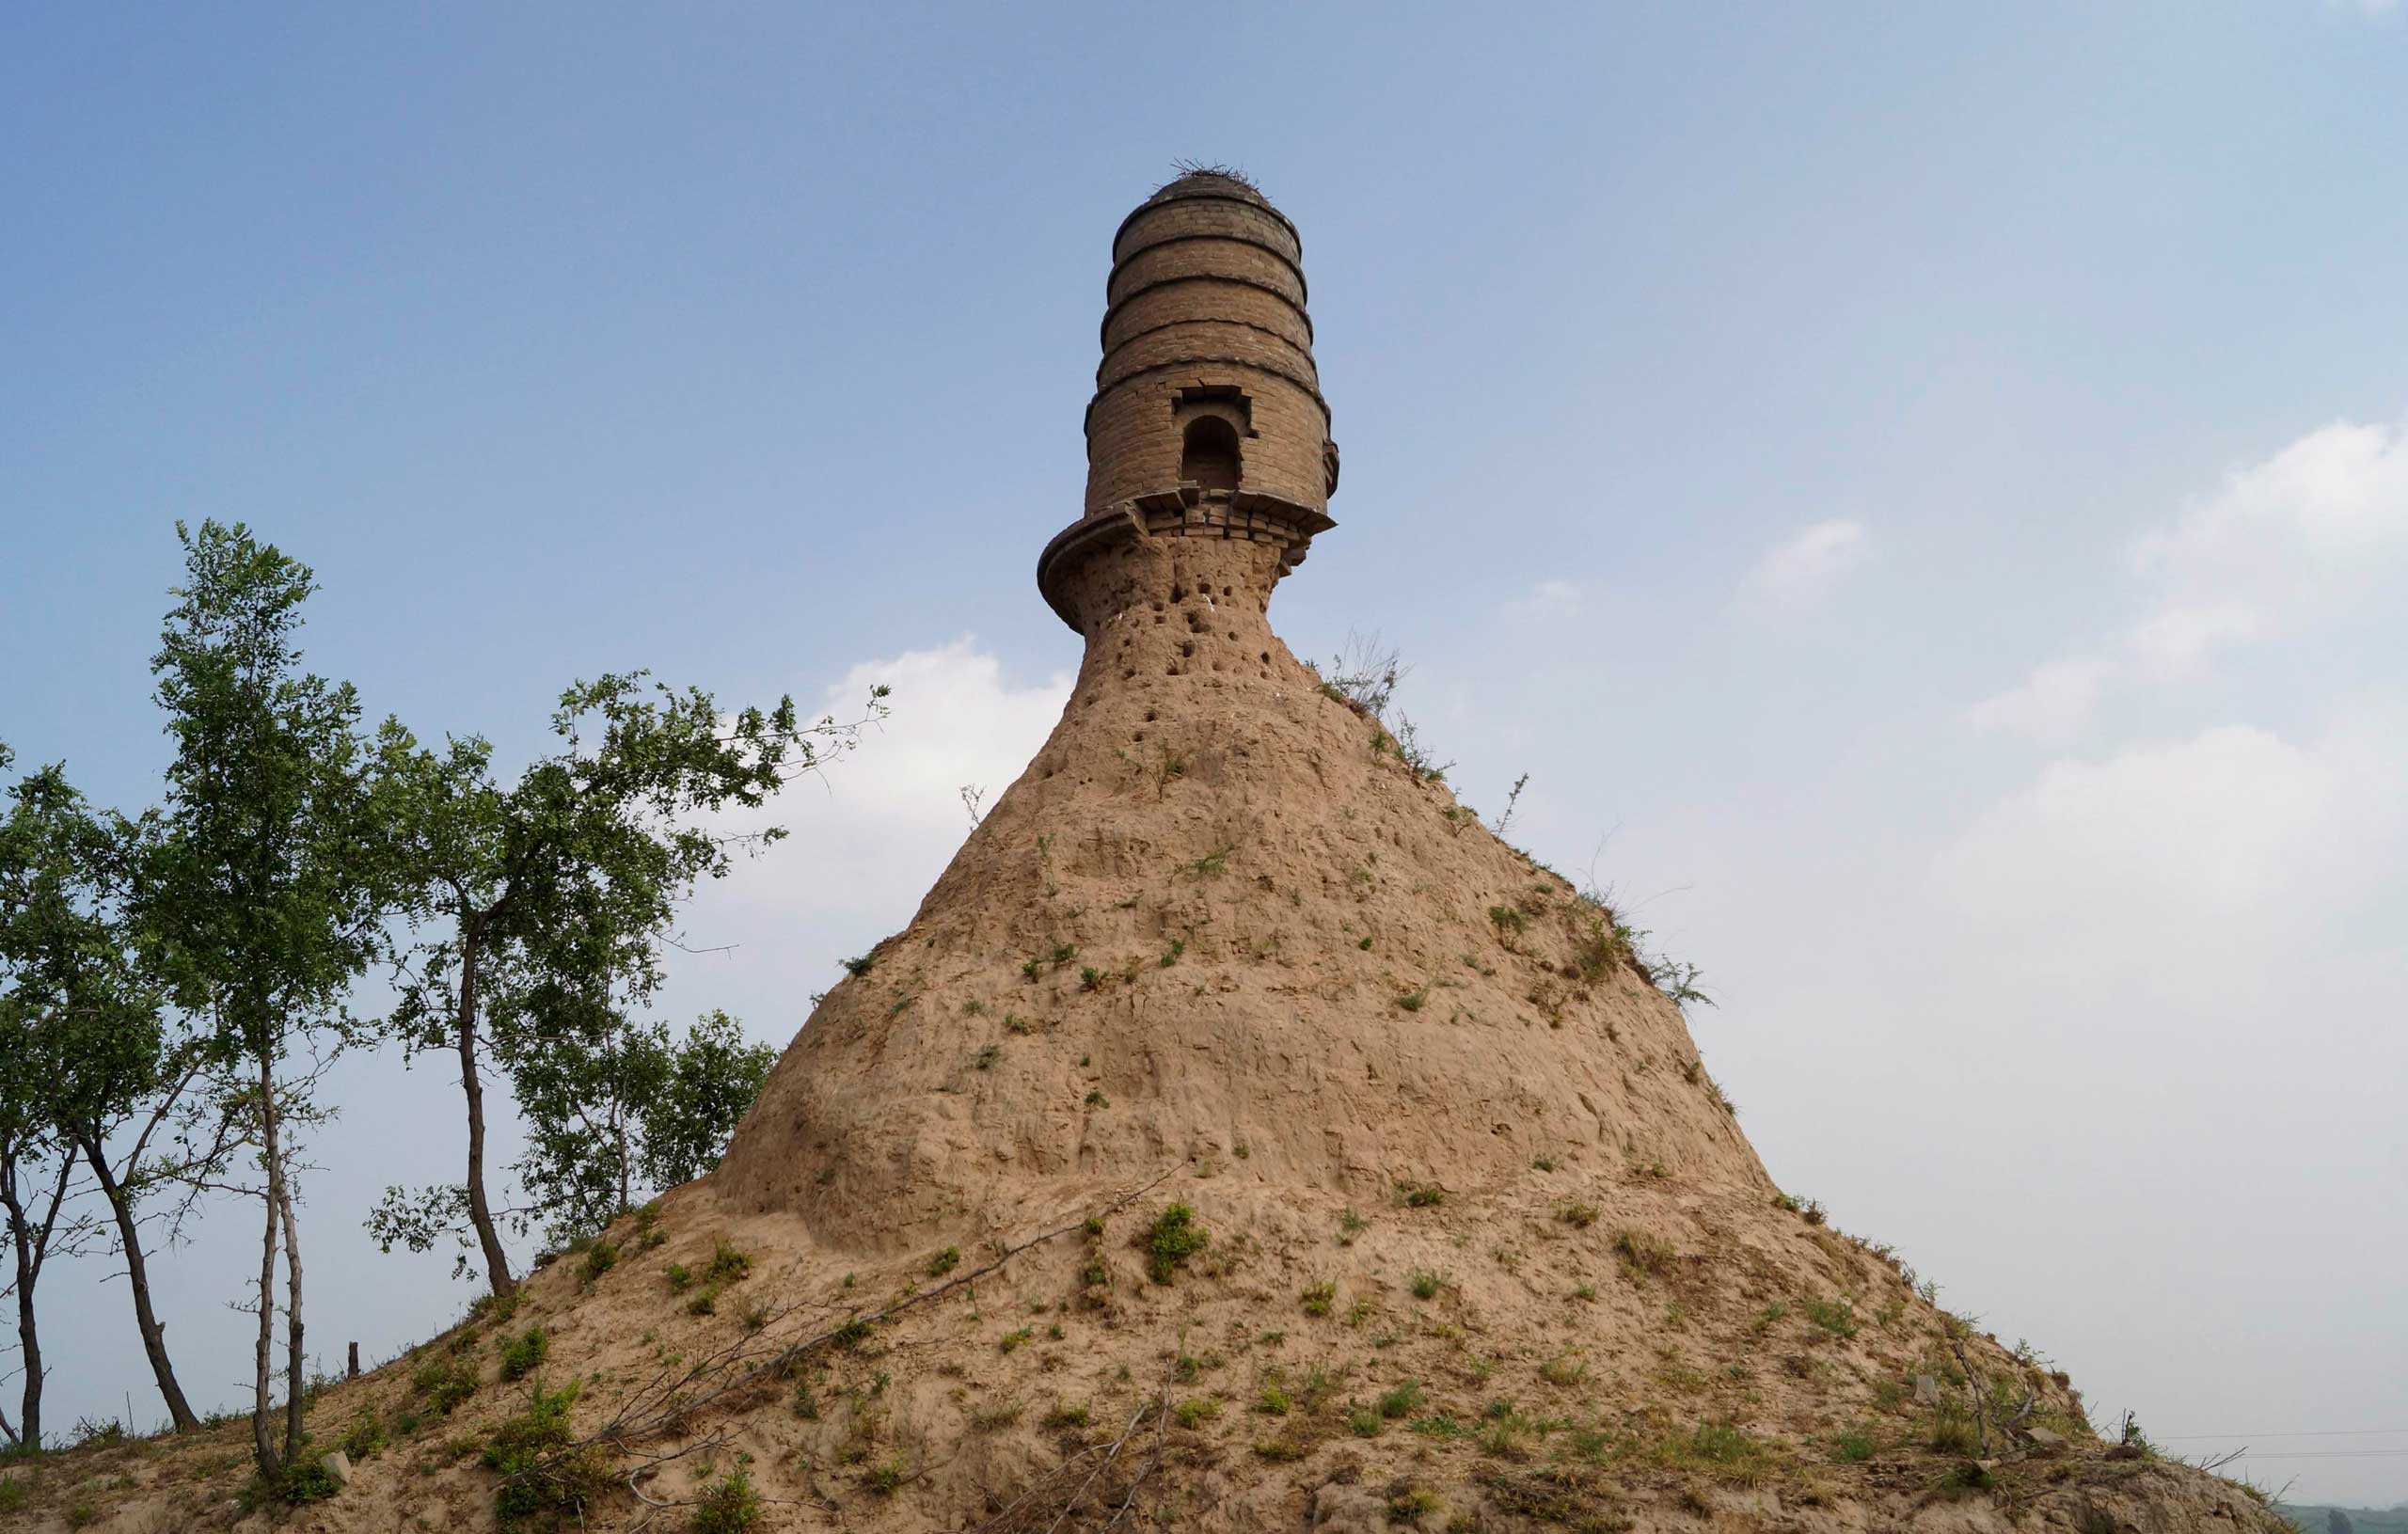 An ancient tower is seen balancing on the top of a dirt hill, with its base slightly eroded, along a grassland in Qixian county, Shanxi province in China, July 19, 2014.